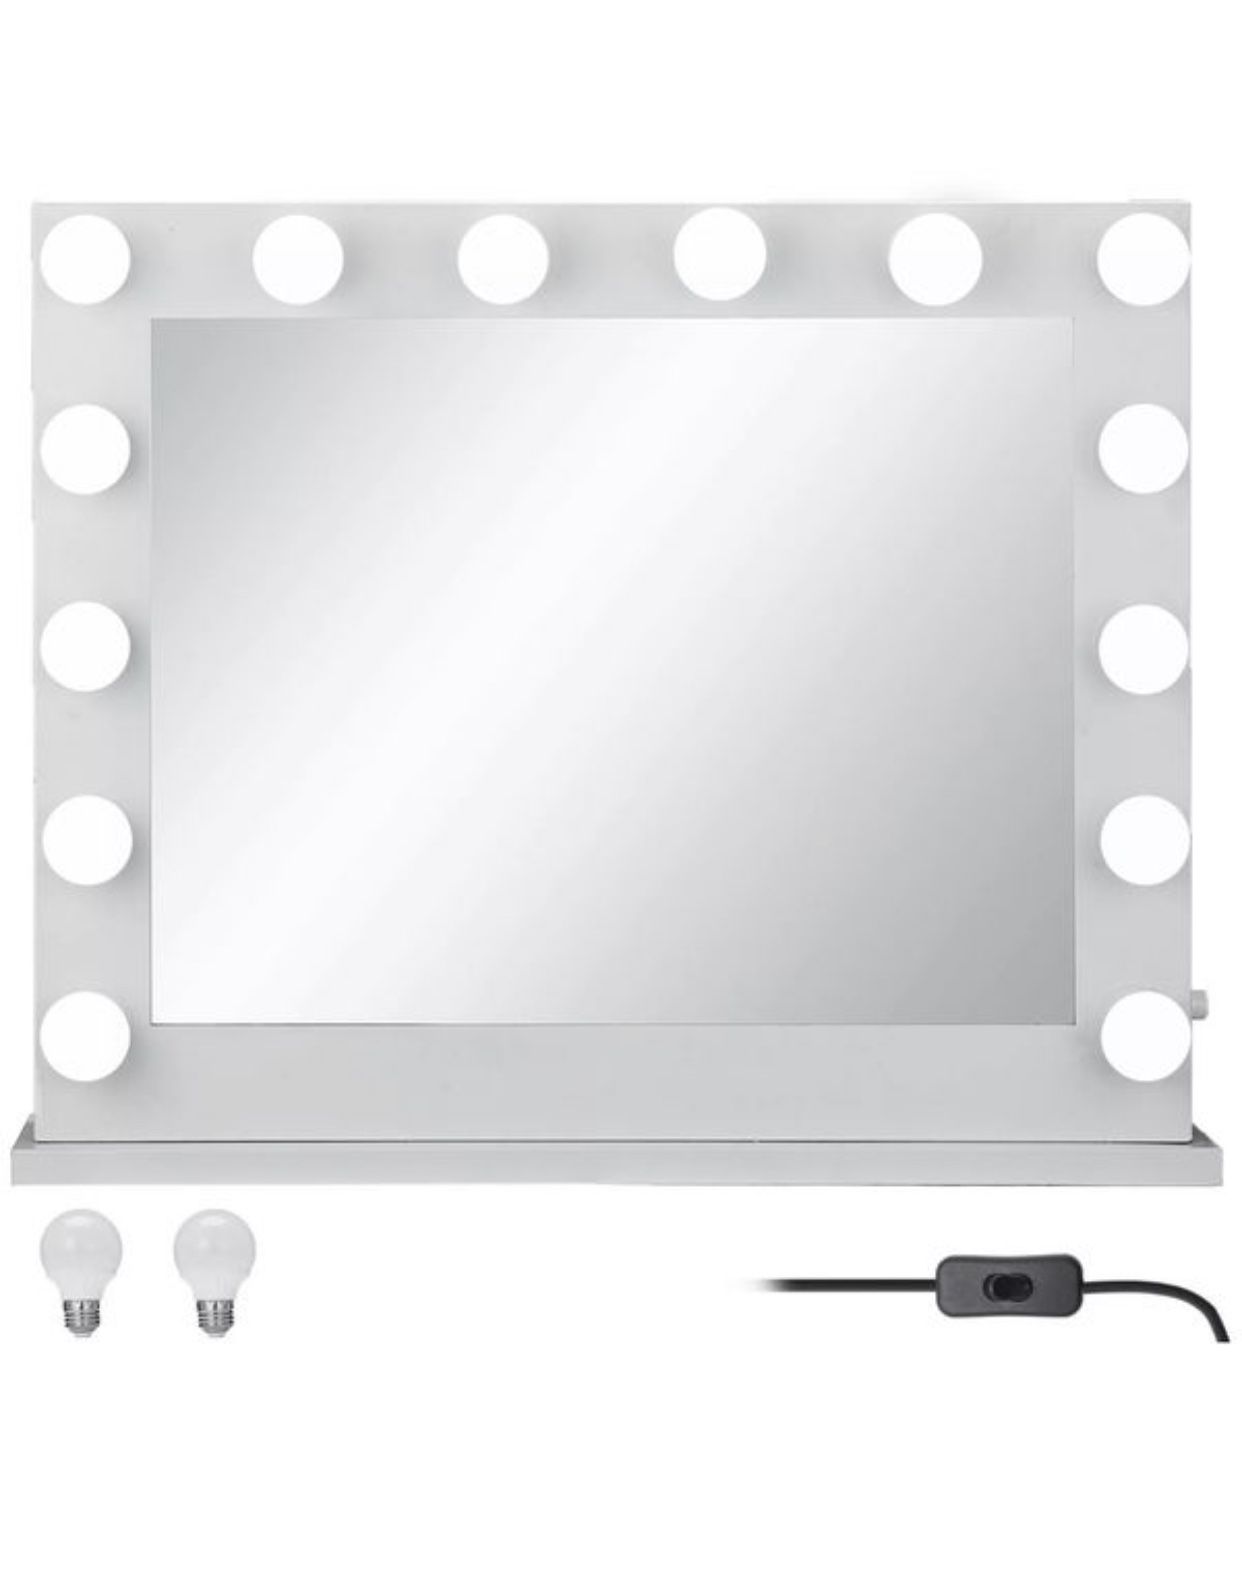 Hollywood Makeup Vanity Mirror Lighted Mirror Dimmer White+FREE LED Bulbs